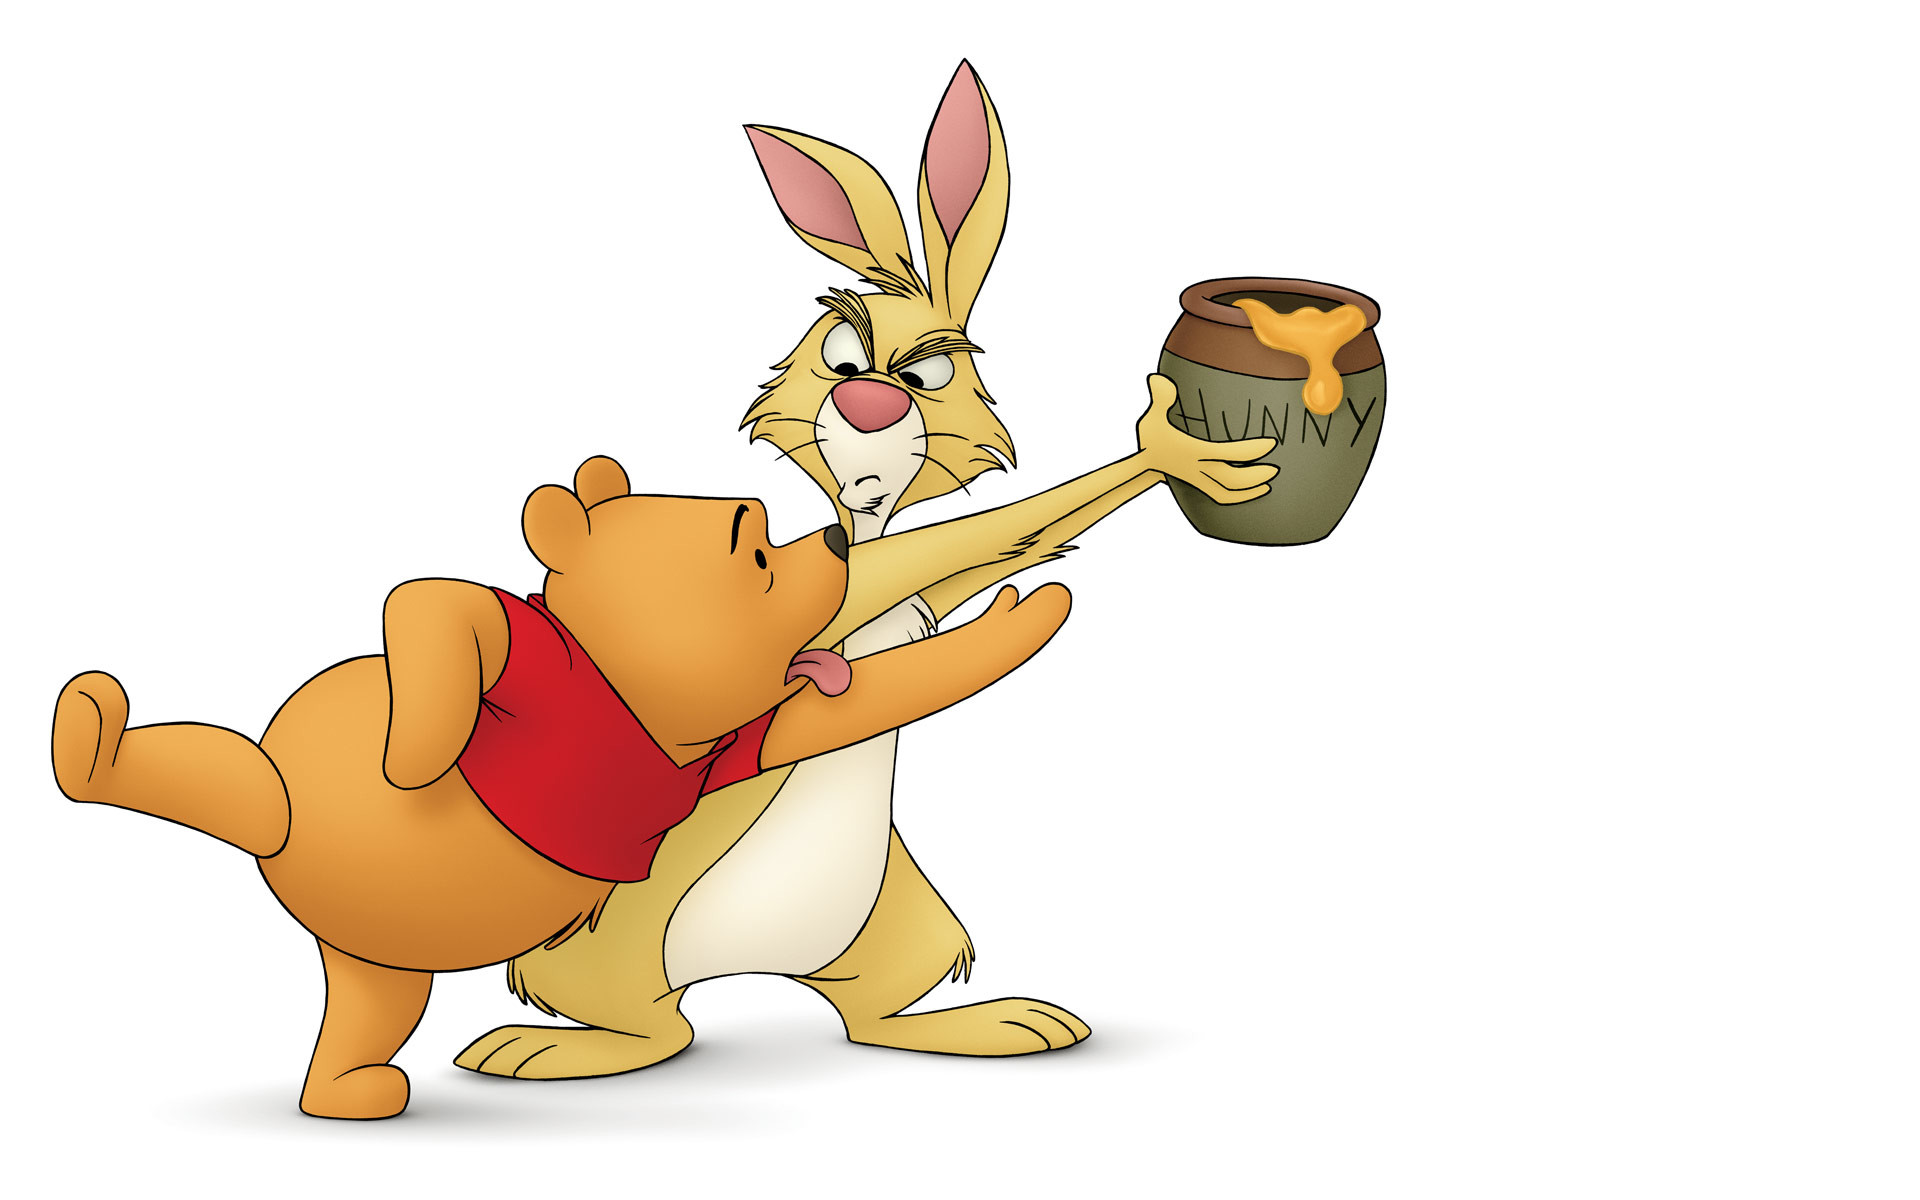 1920x1200 Pooh bear trying to get his hunny/honey pot from Rabbit from Winnie the Pooh